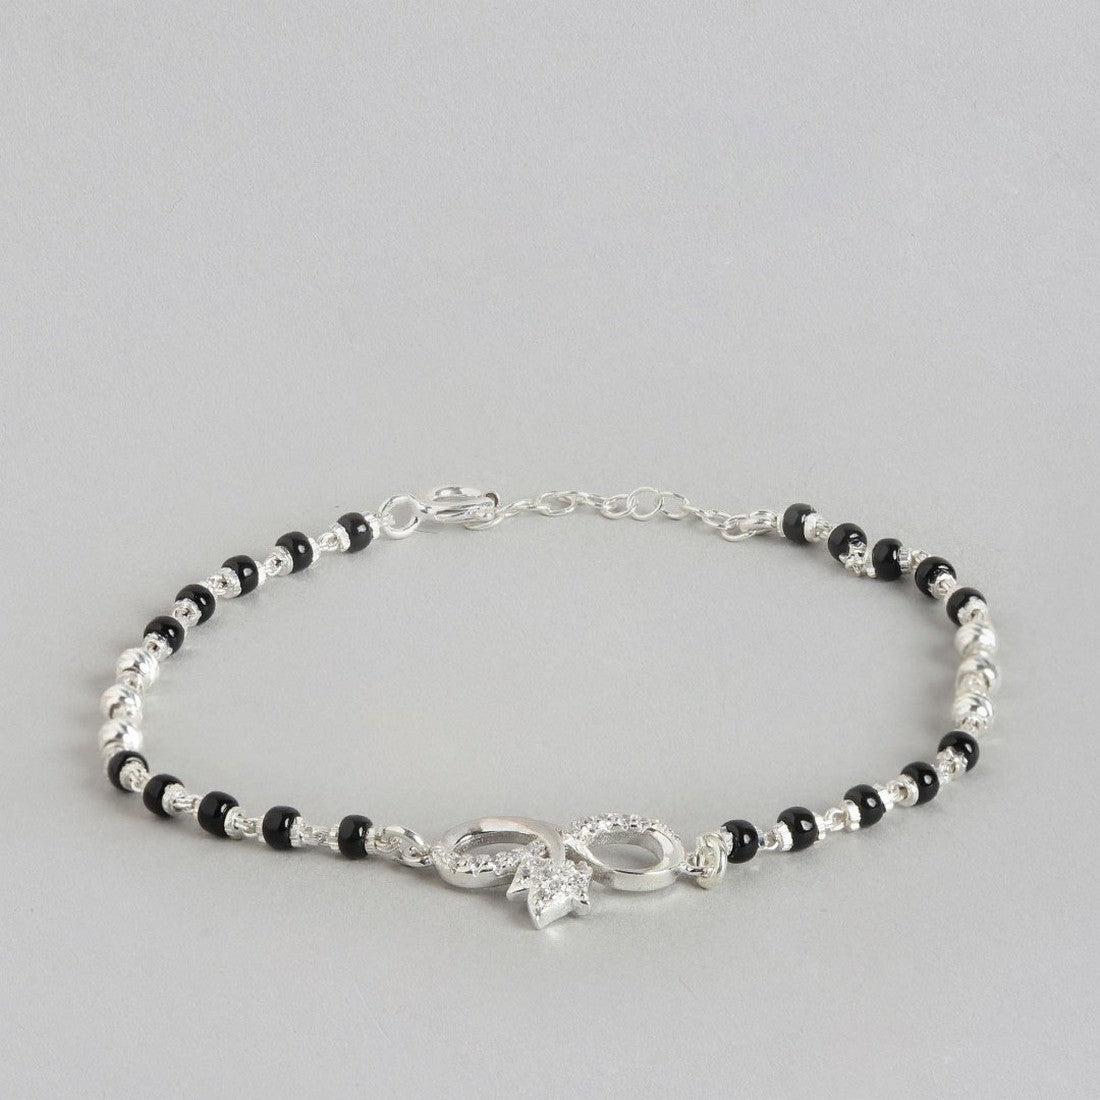 Twisted Infinity 925 Silver Mangalsutra Bracelet